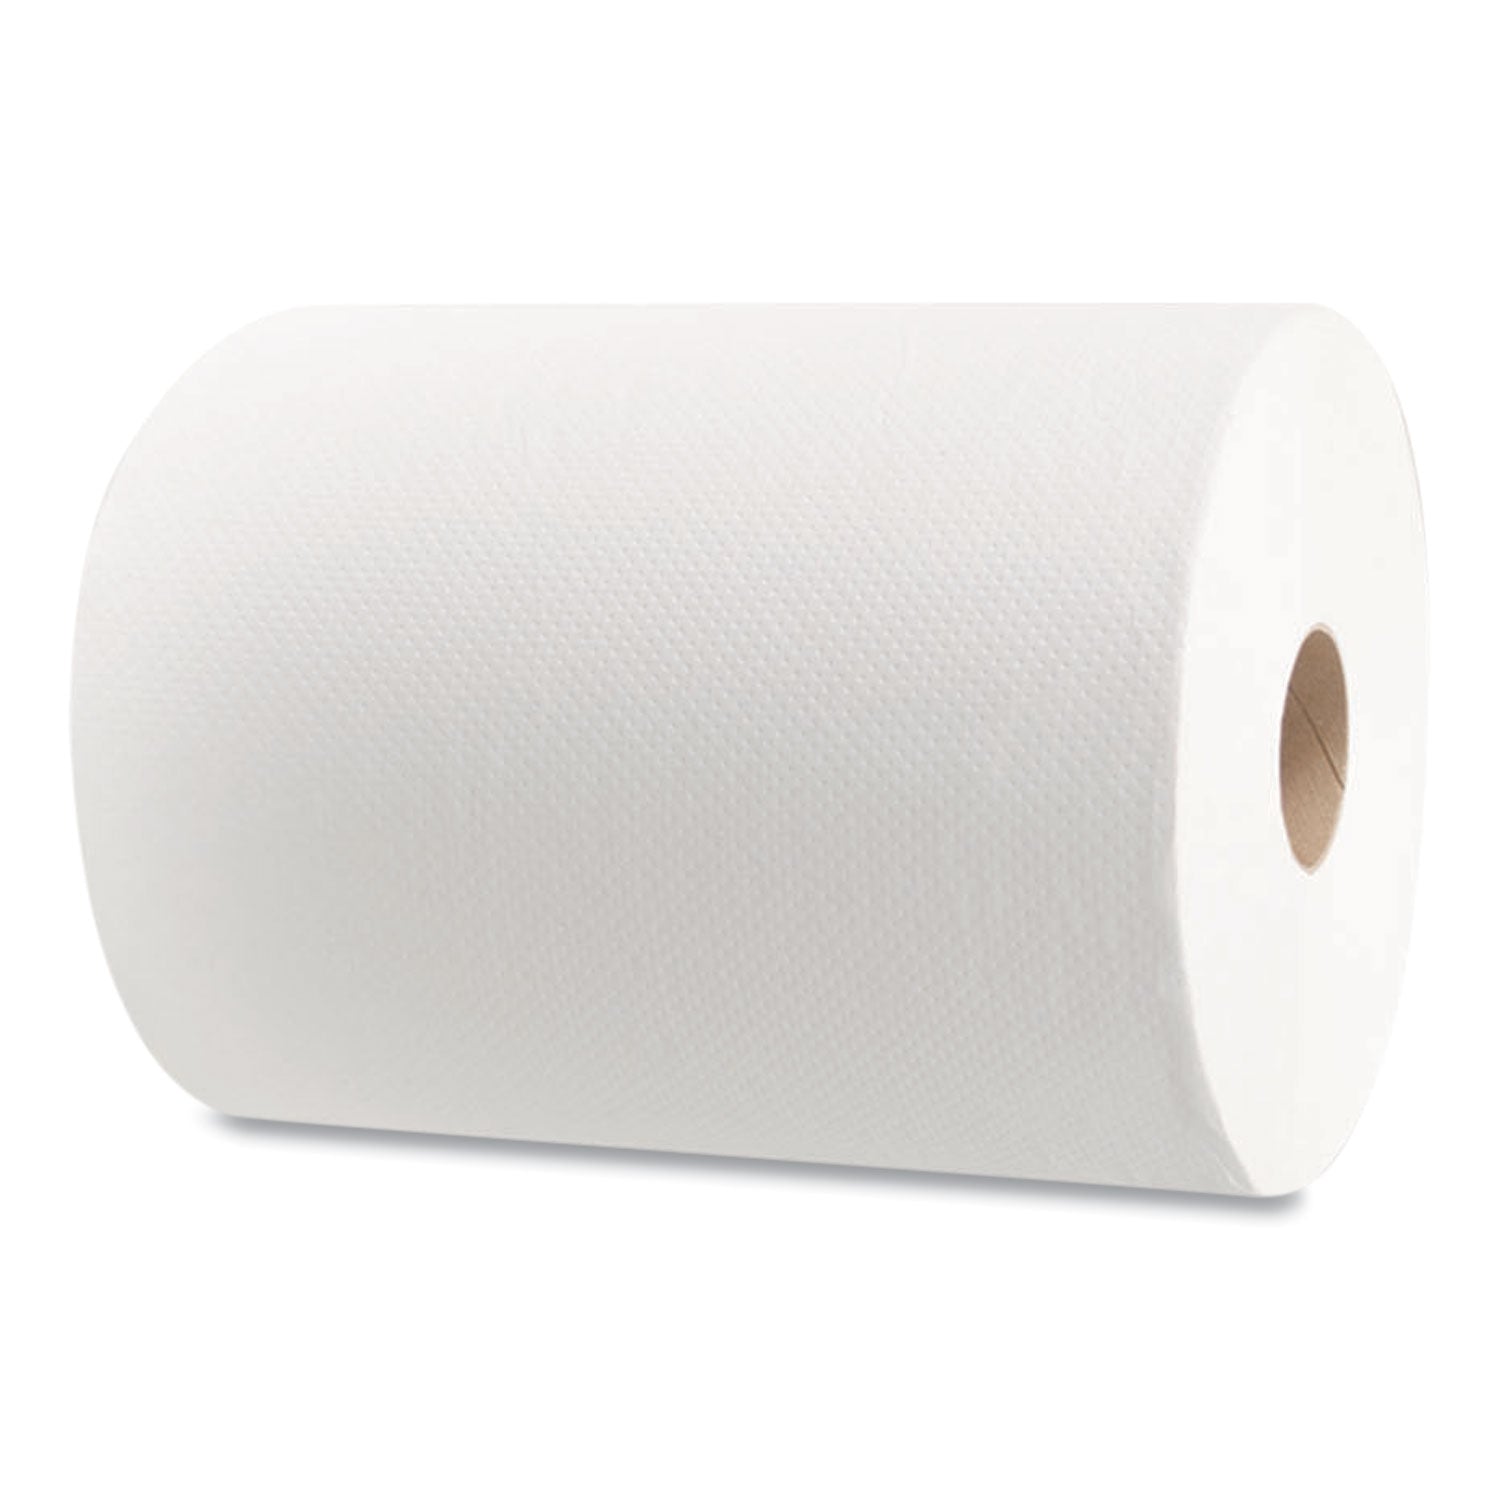 10-inch-roll-towels-1-ply-10-x-800-ft-white-6-rolls-carton_morw106 - 5